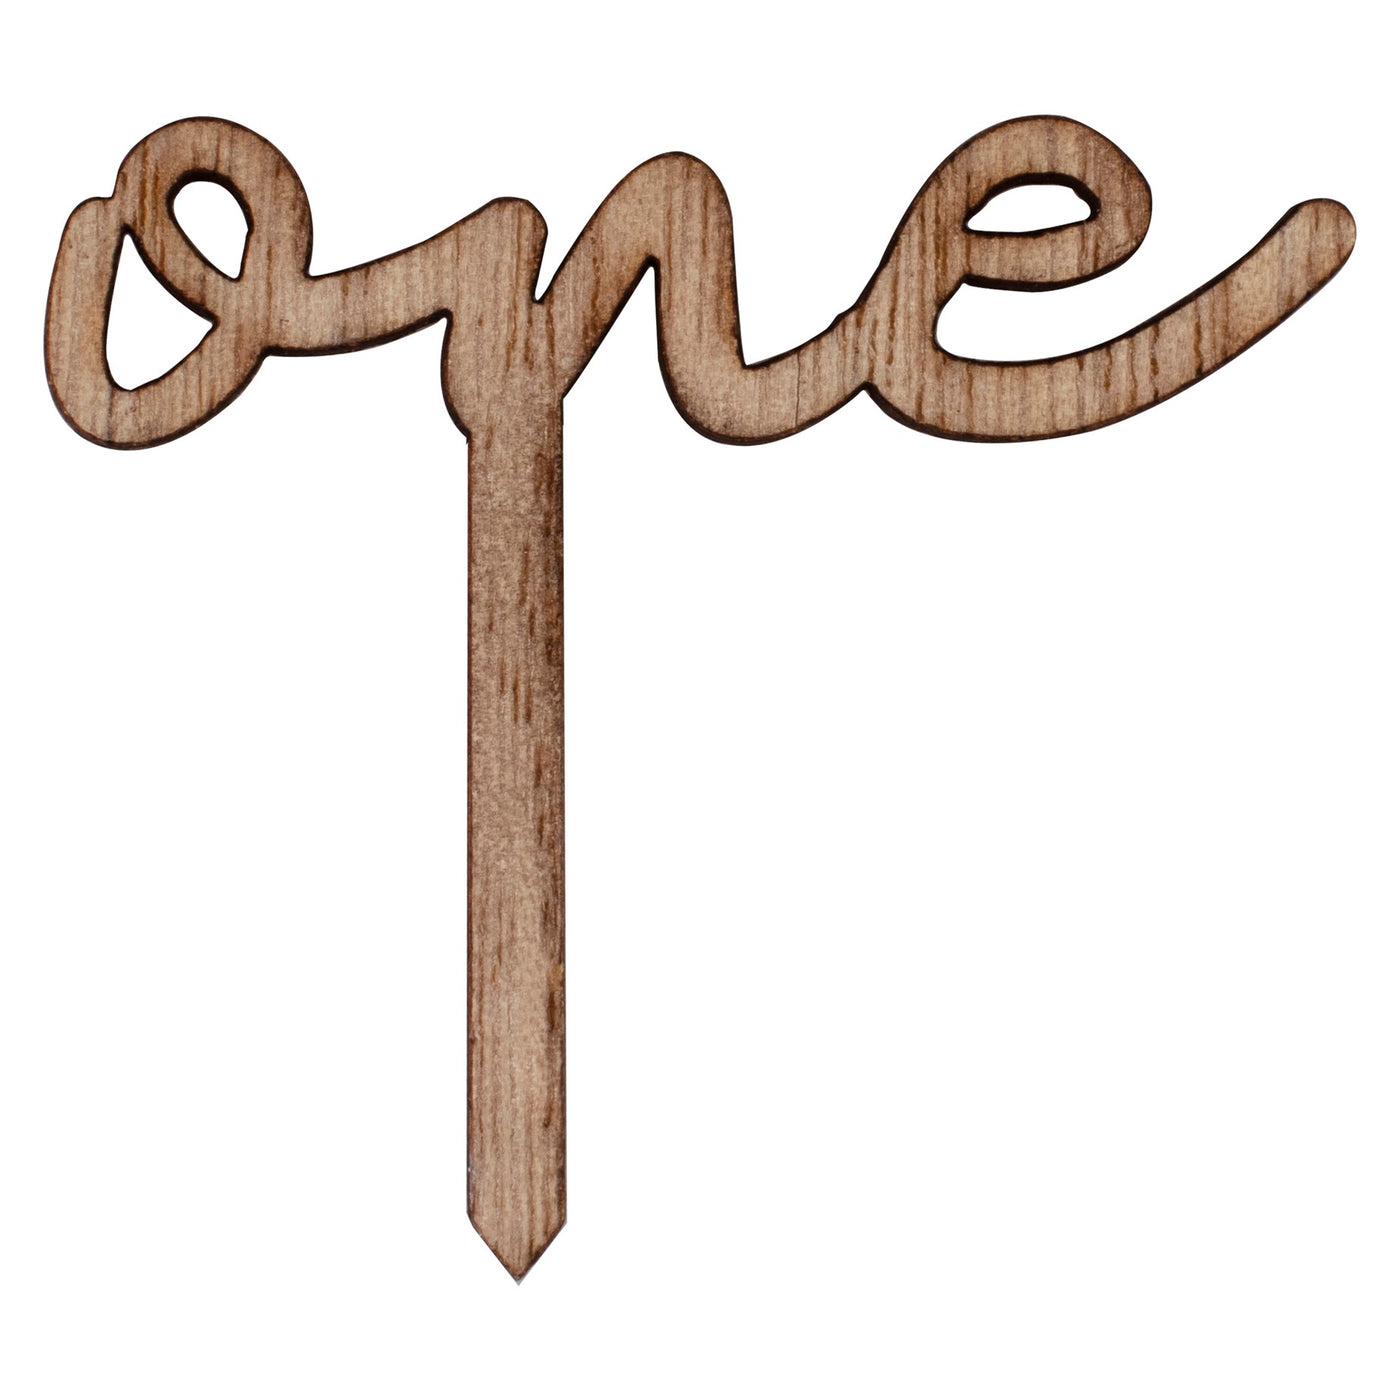 Ginger Ray Wooden 'One' 1st Birthday Cupcake Toppers